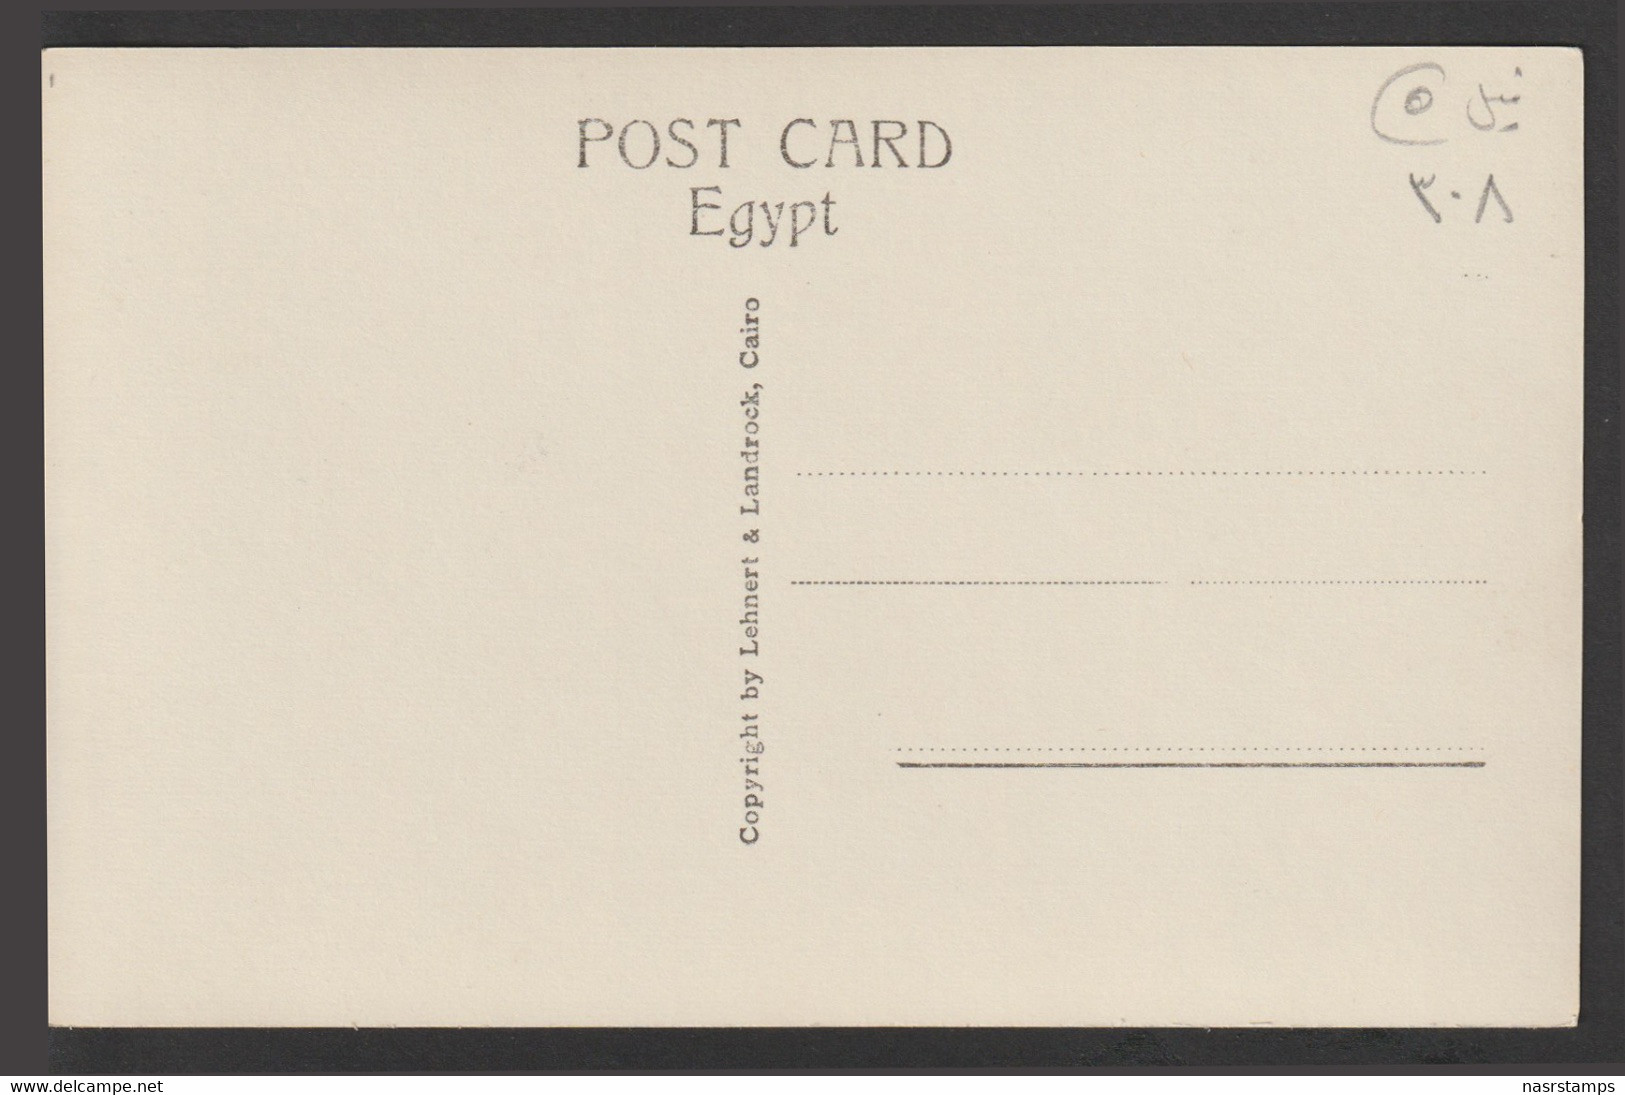 Egypt - Rare - Vintage Post Card - Woden Heads - Cairo Museum - Covers & Documents